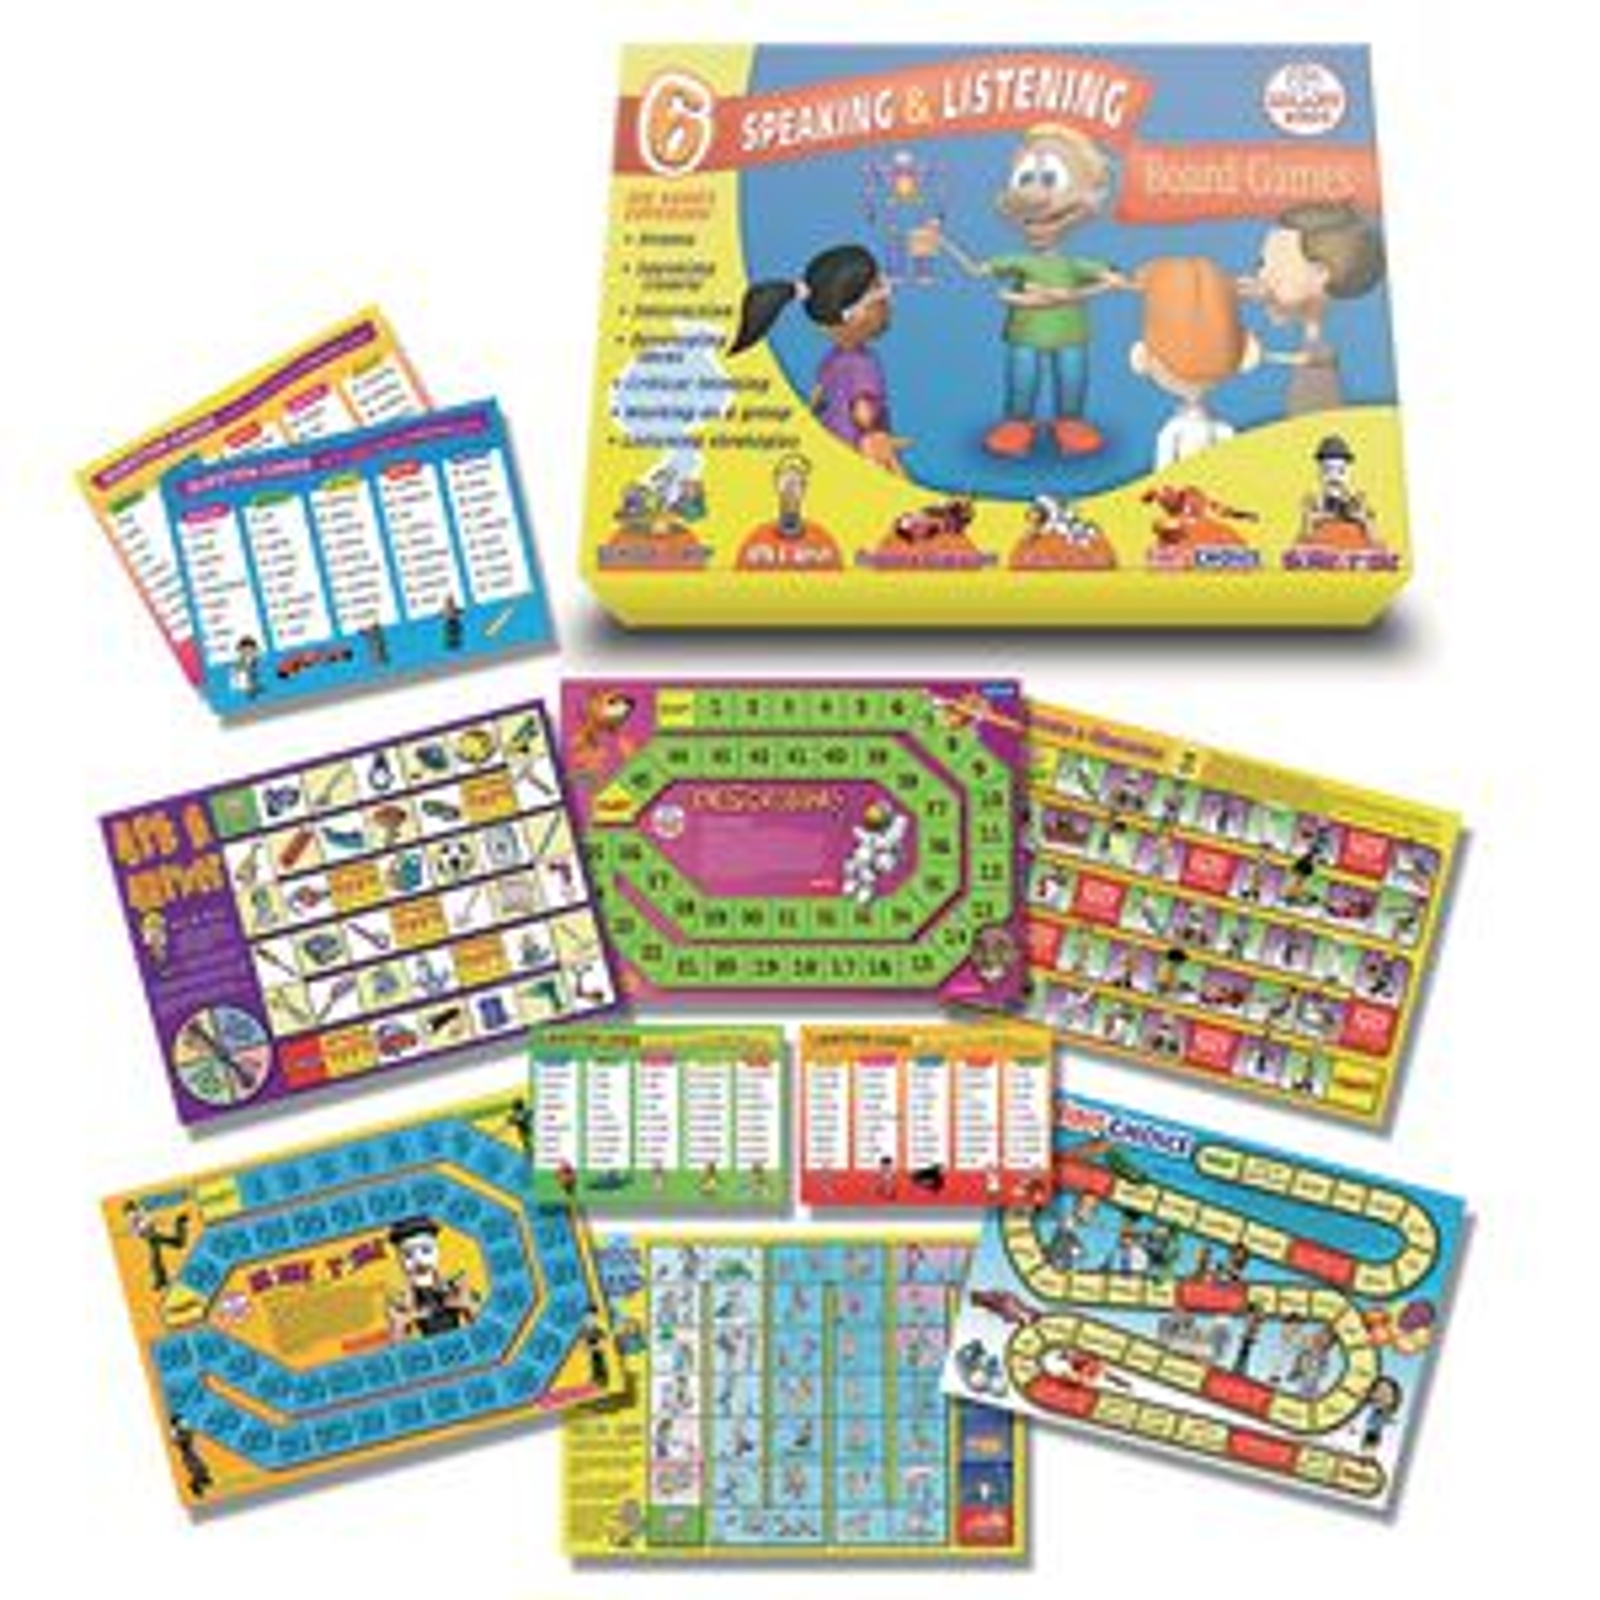 Speaking and Listening Games Pack of 6